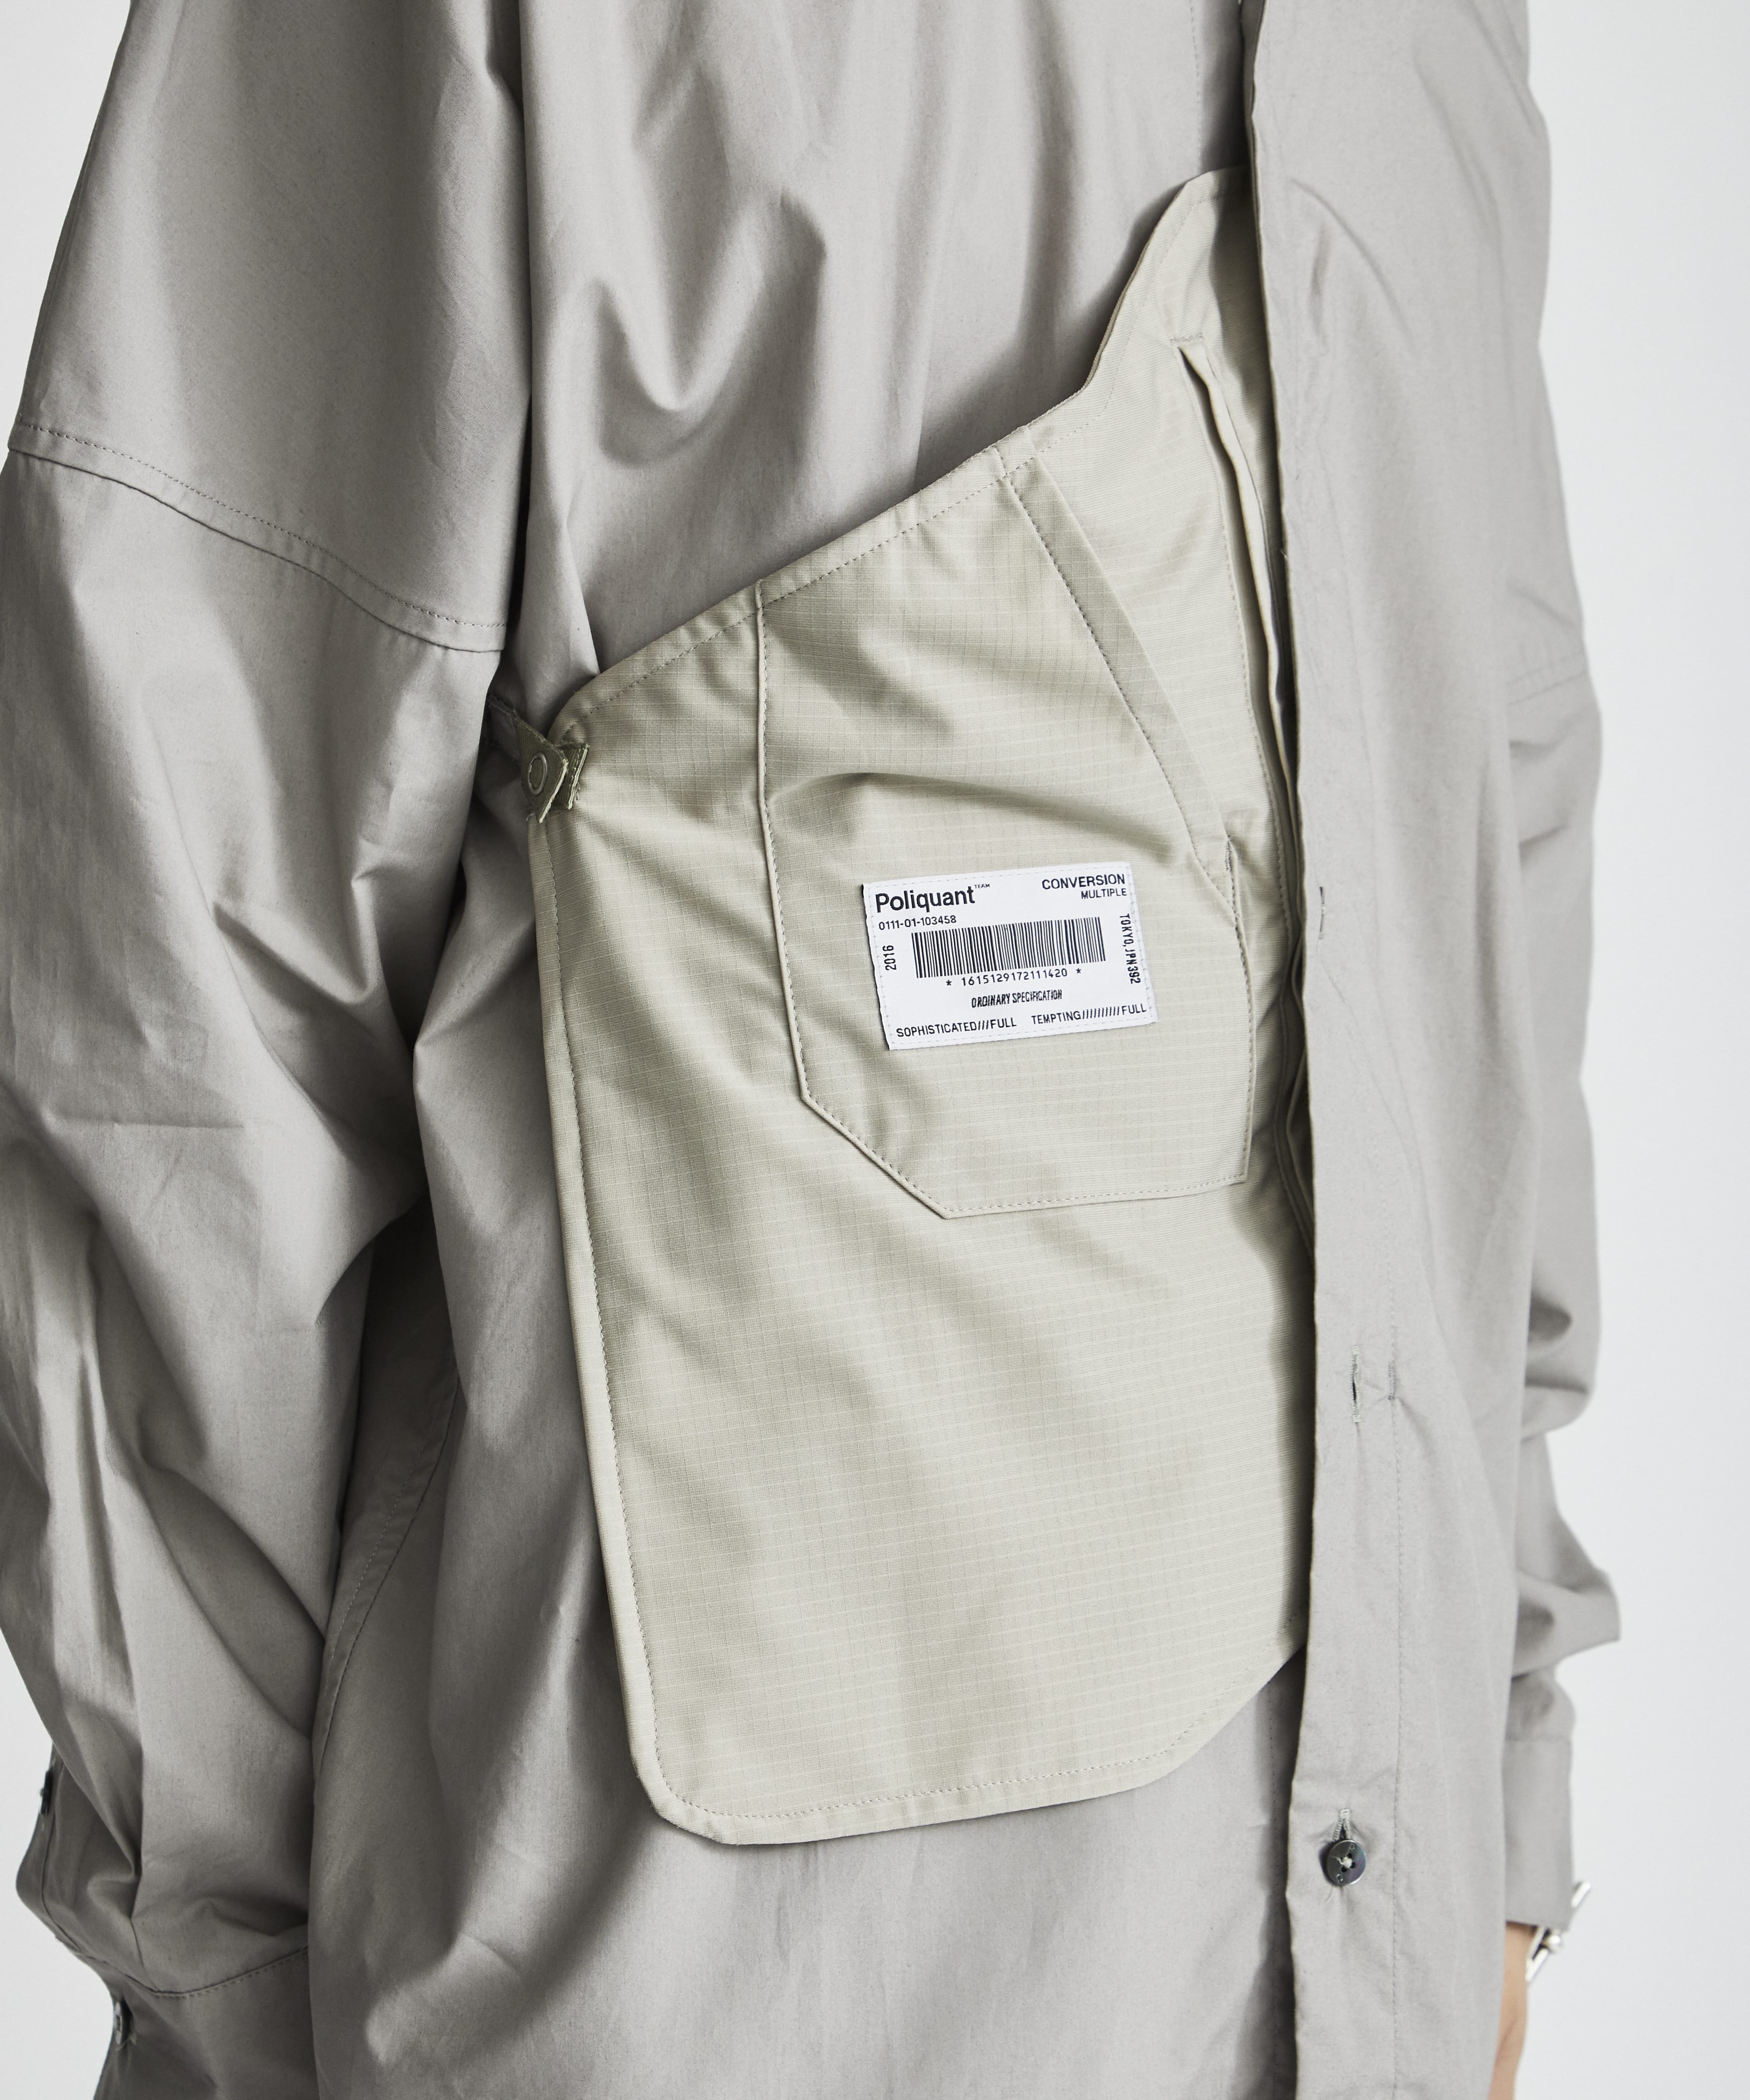 THE IN-OUT PACKABLE POCKET SHIRTS(1 LIGHT GREY): POLIQUANT: MENS 